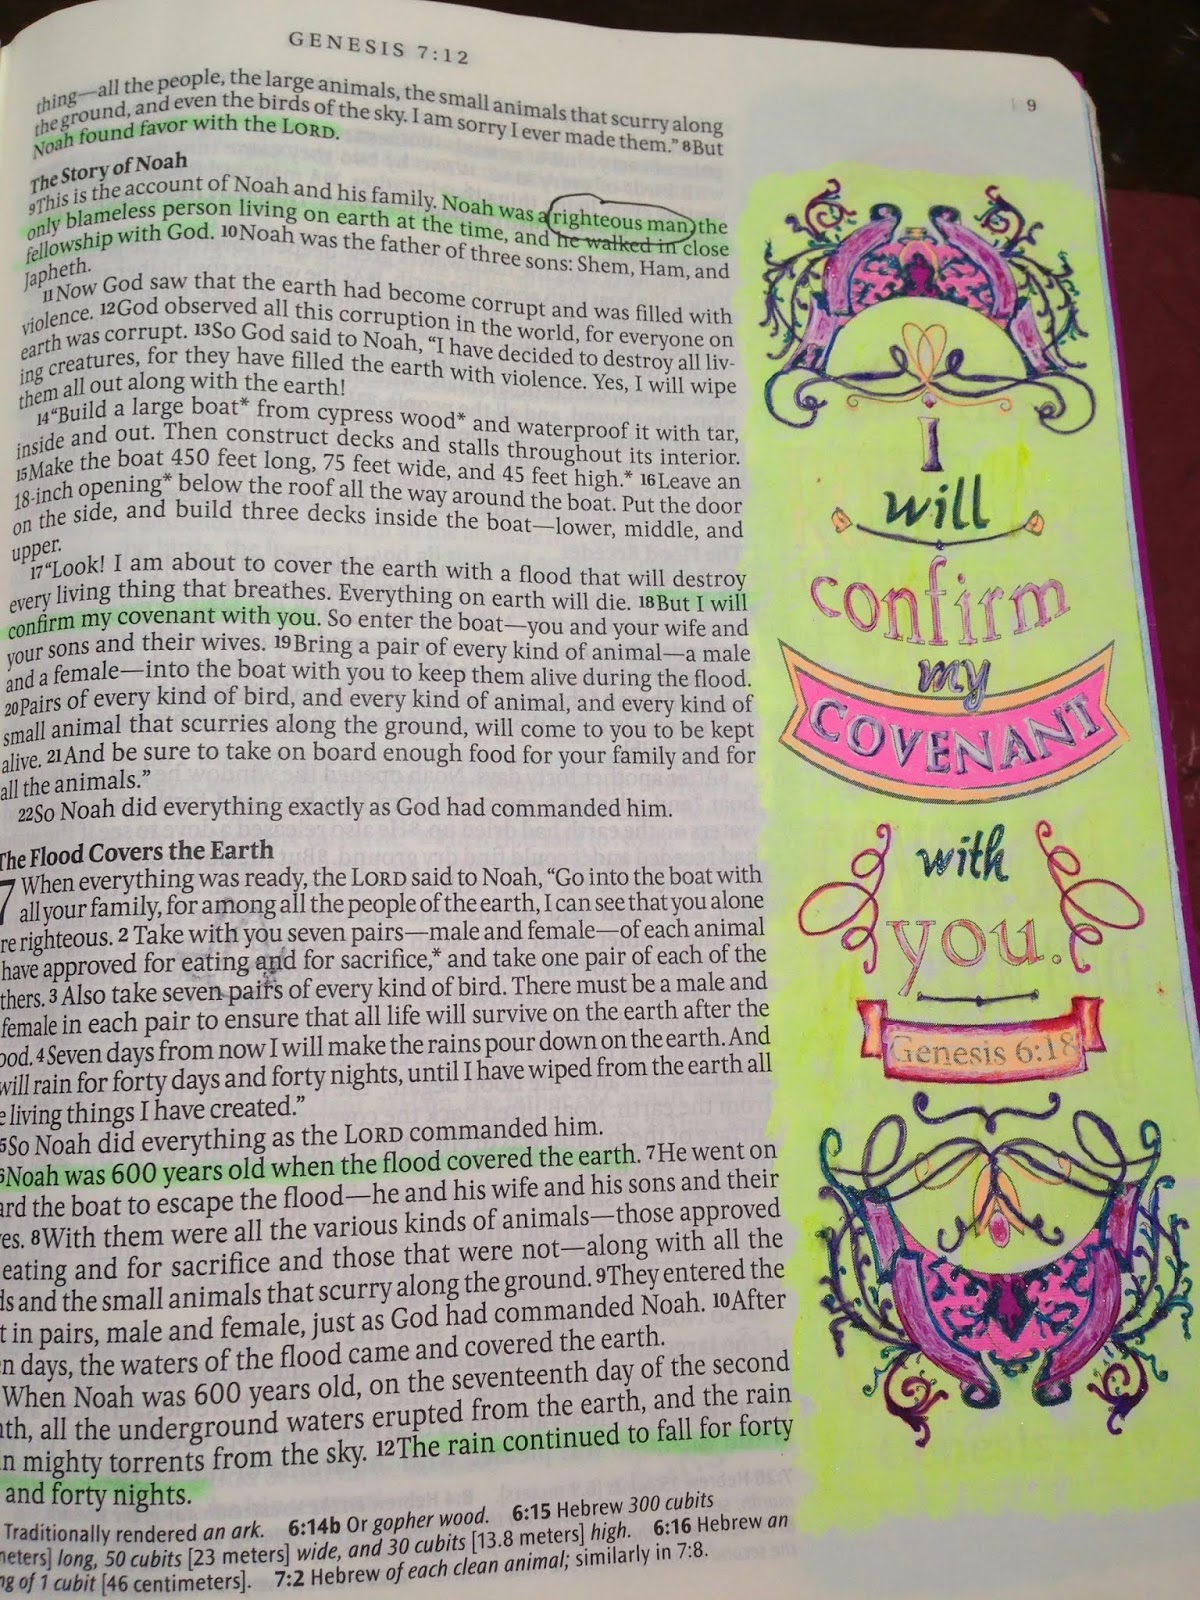 13 Best Pens & Markers For Bible Journaling